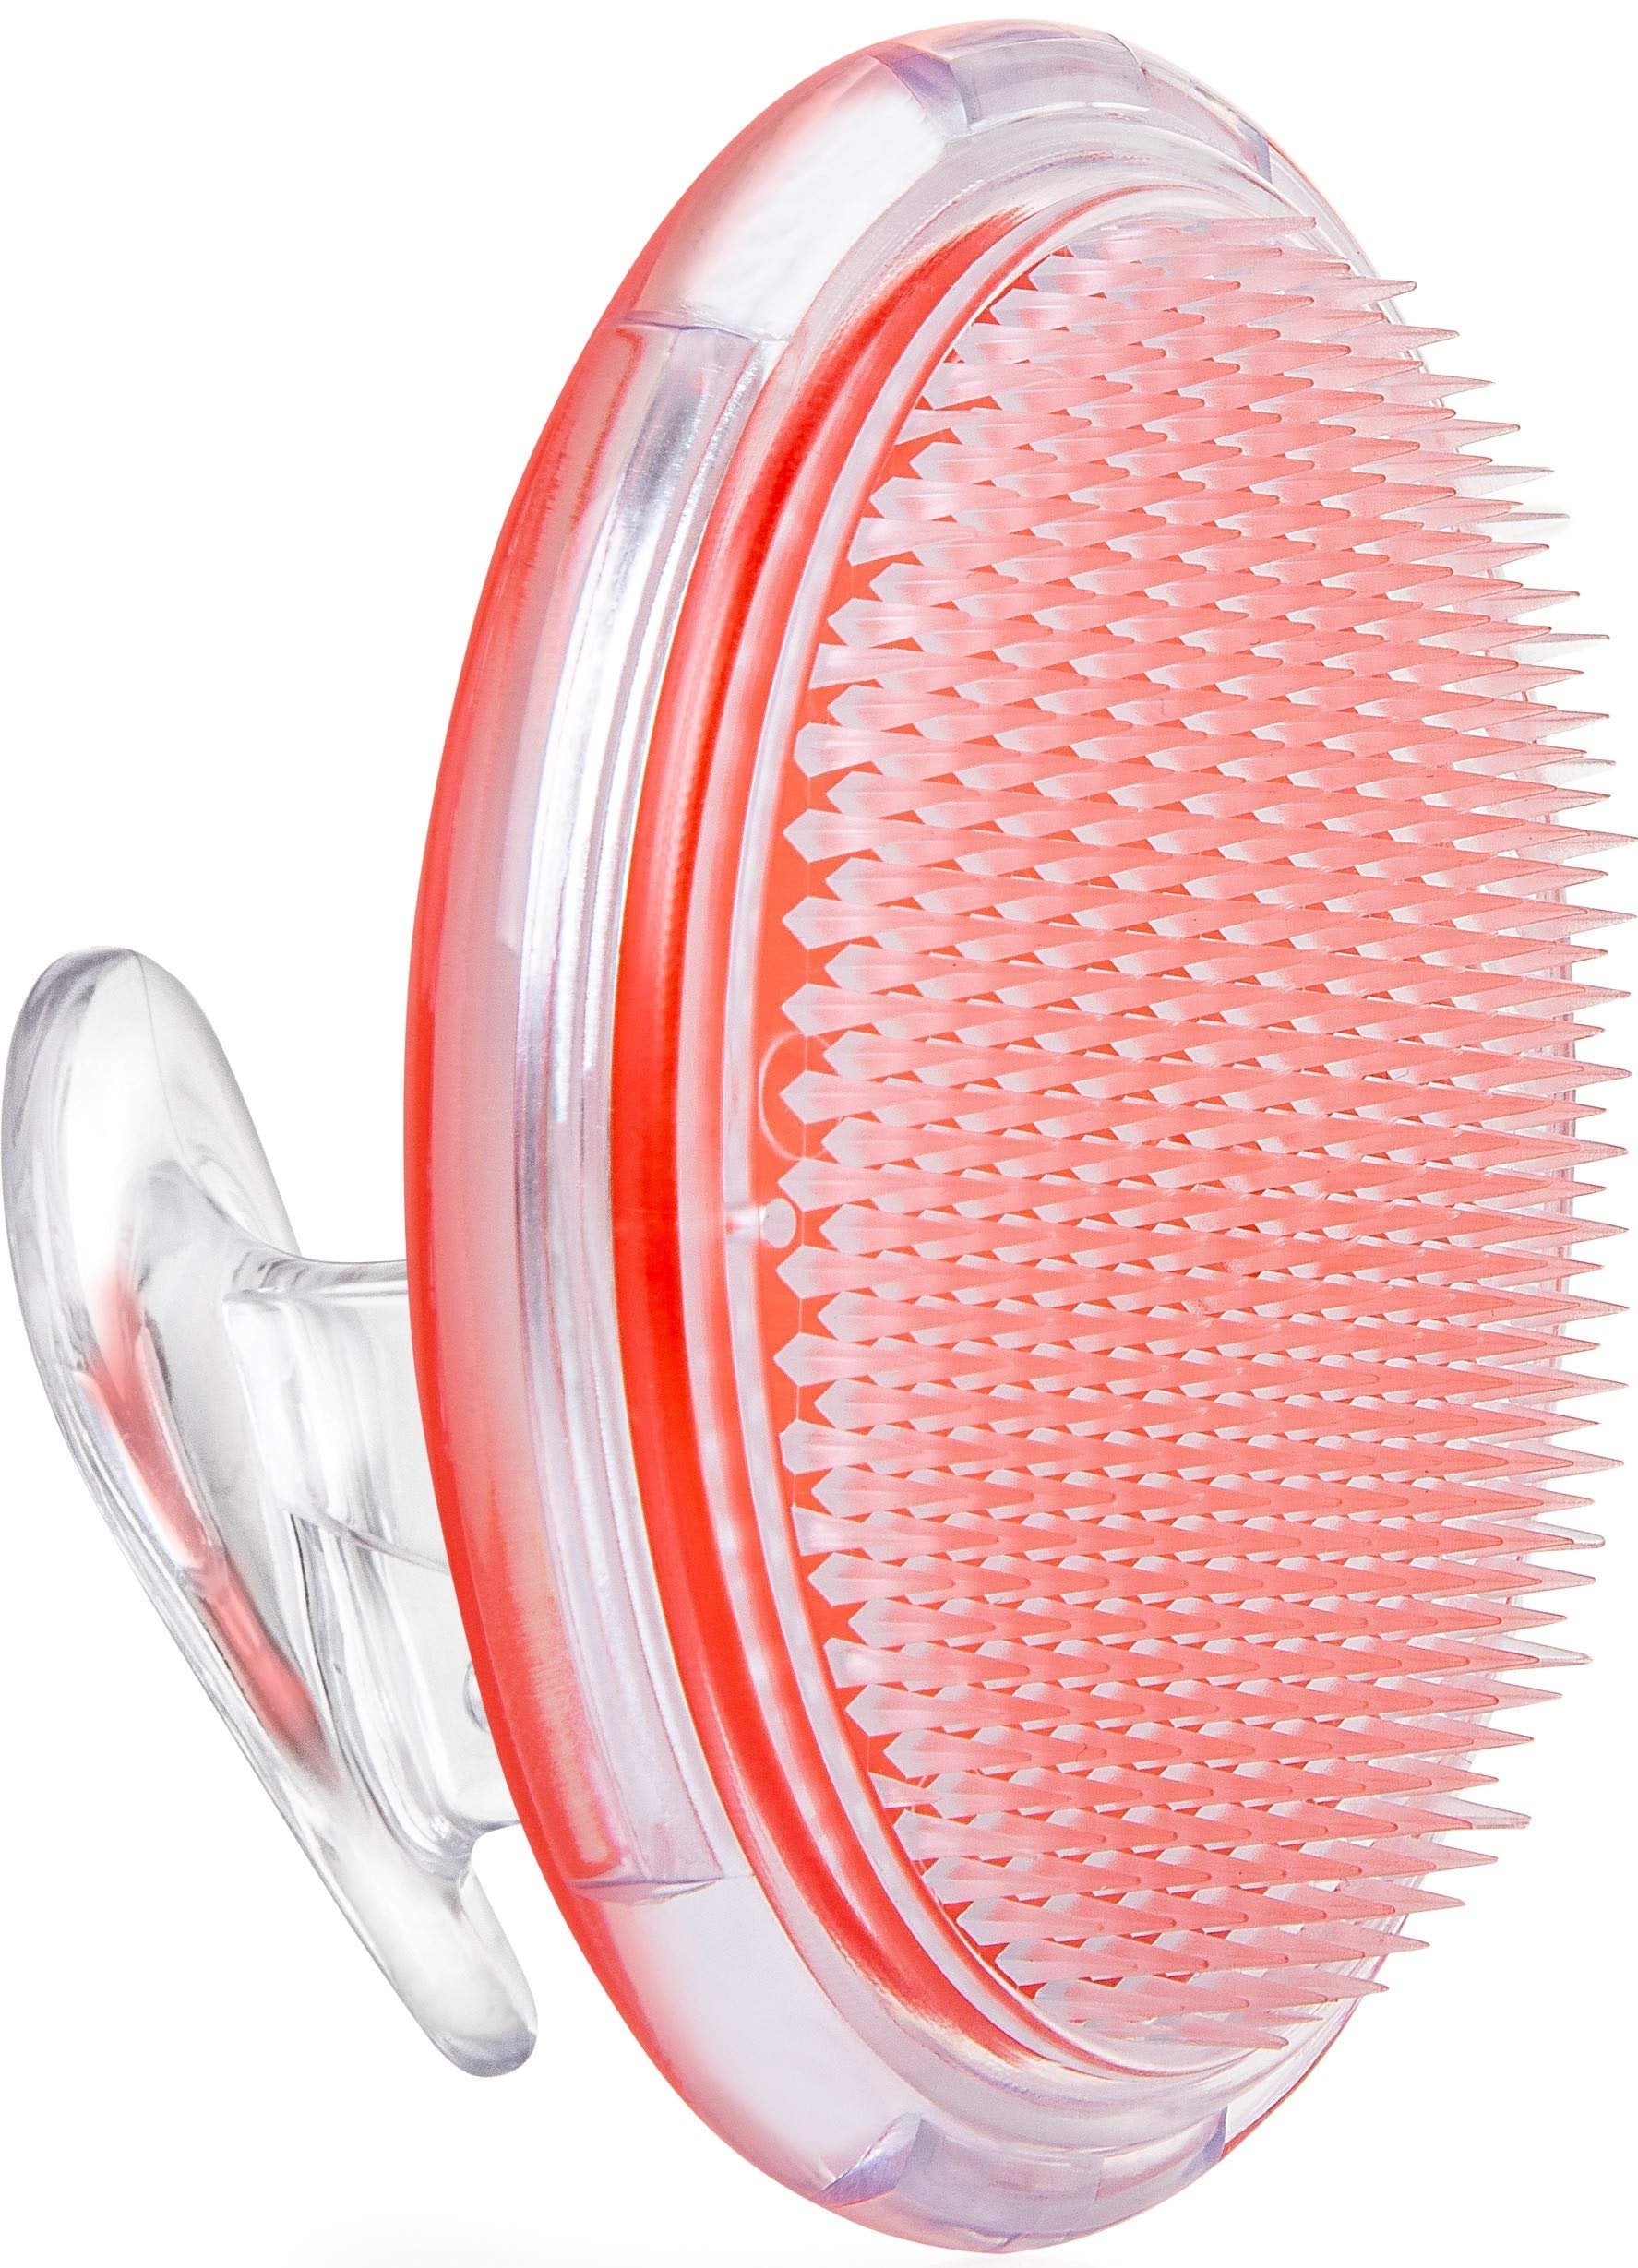 Exfoliating Brush to Treat and Prevent Razor Bumps and Ingrown Hairs - Eliminate Shaving Irritation for Face, Armpit, Legs, Neck, Bikini Line - Silky Smooth Skin Solution for Men and Women by Dylonic (Orange Single)